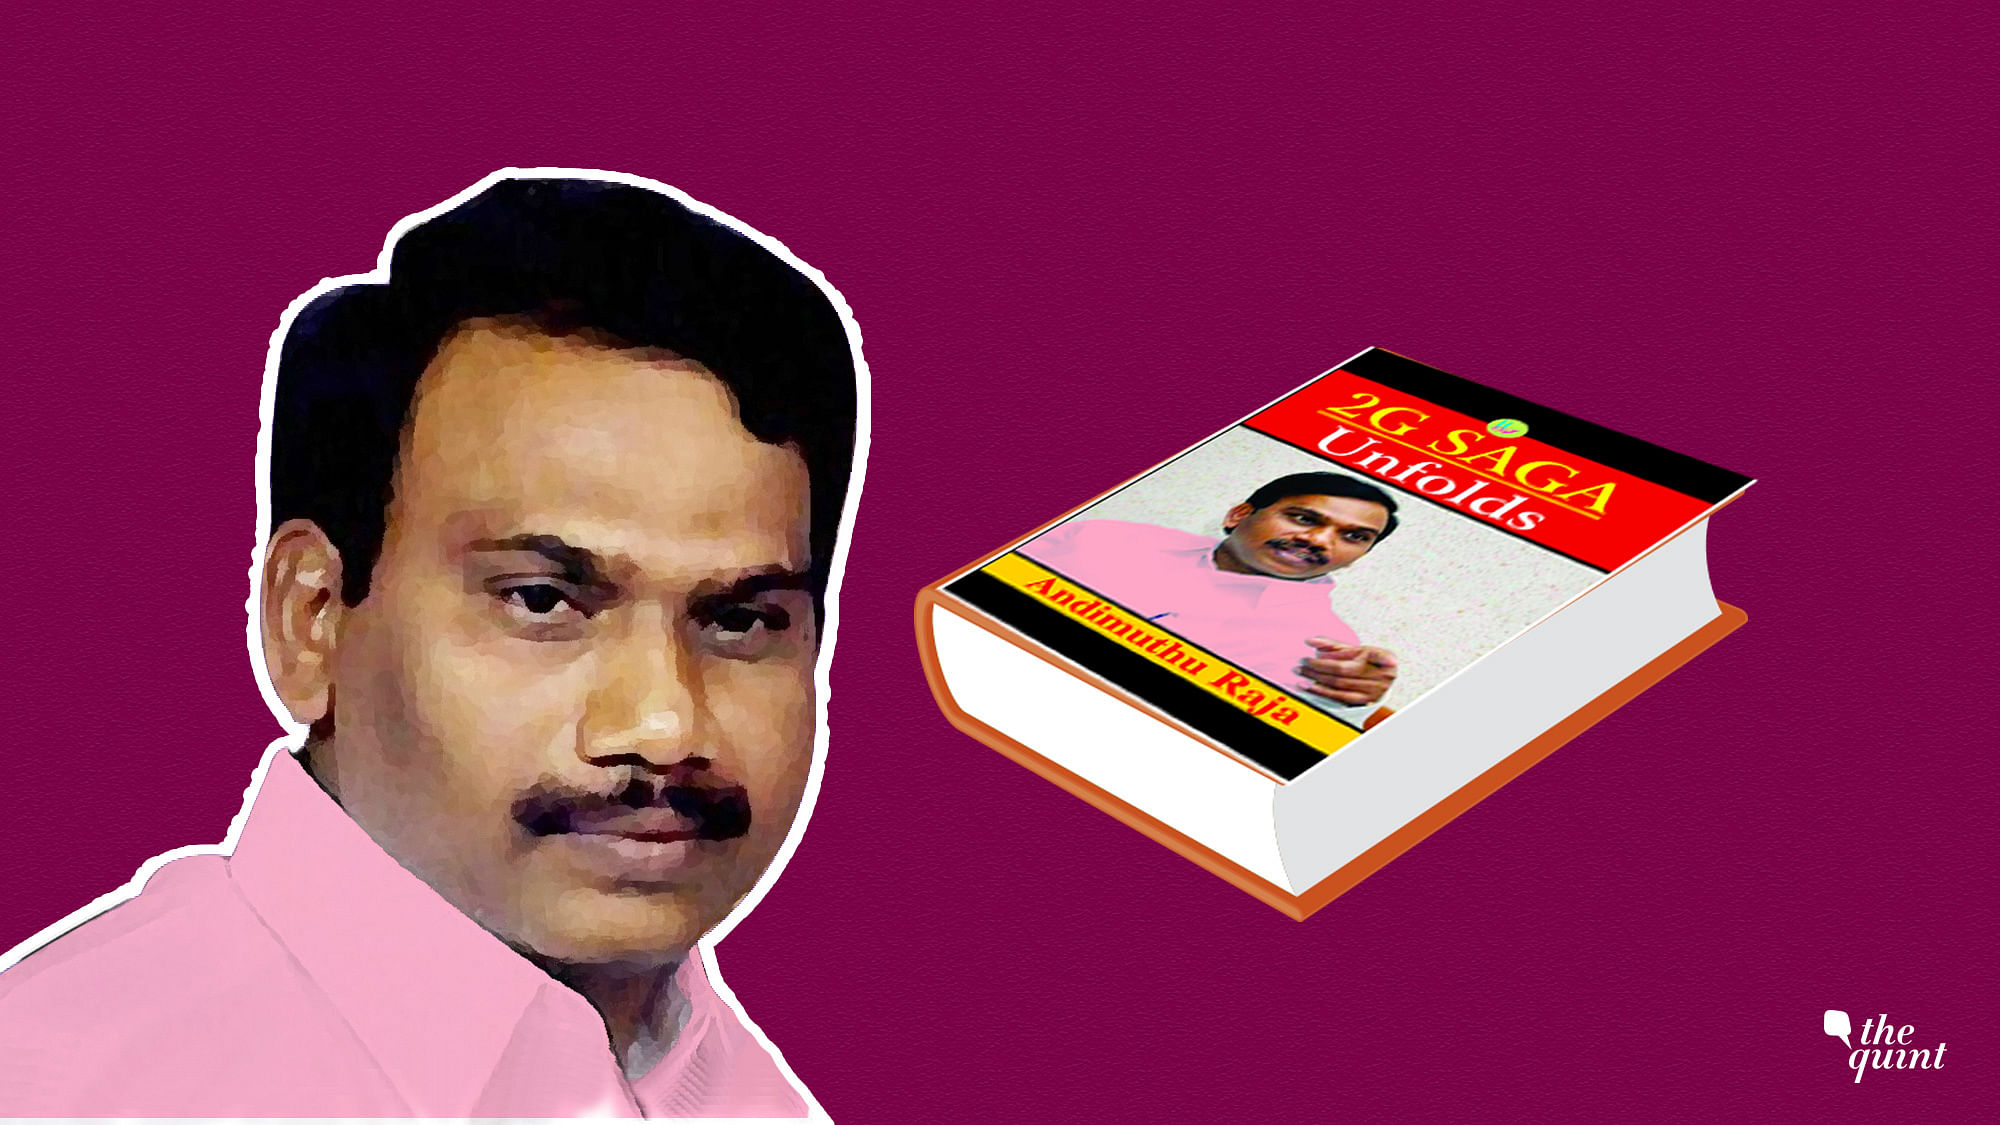 Image of A Raja with his book, used for representational purposes.